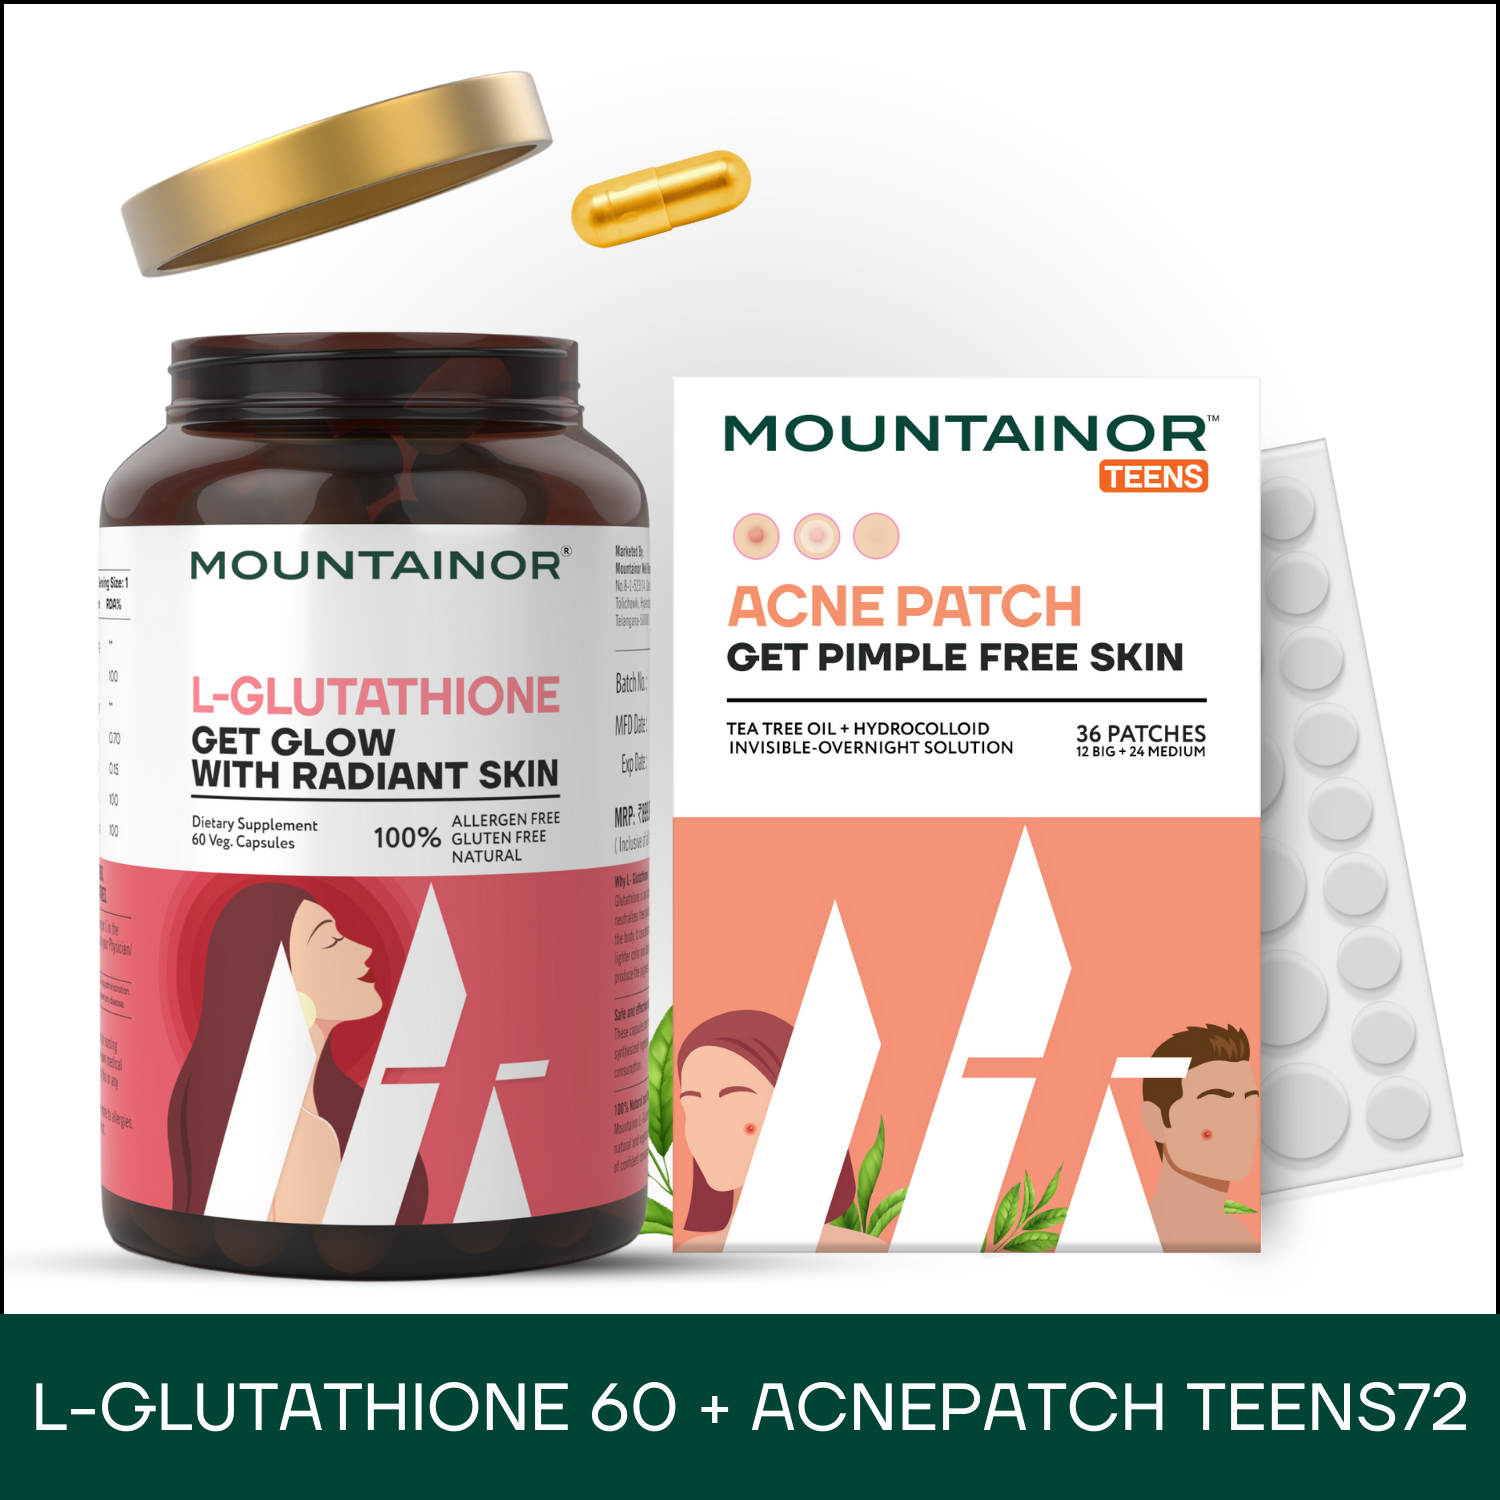 Acne Pimple Patch For Teens(72) + Glutathione 60 Caps - Combo Pack